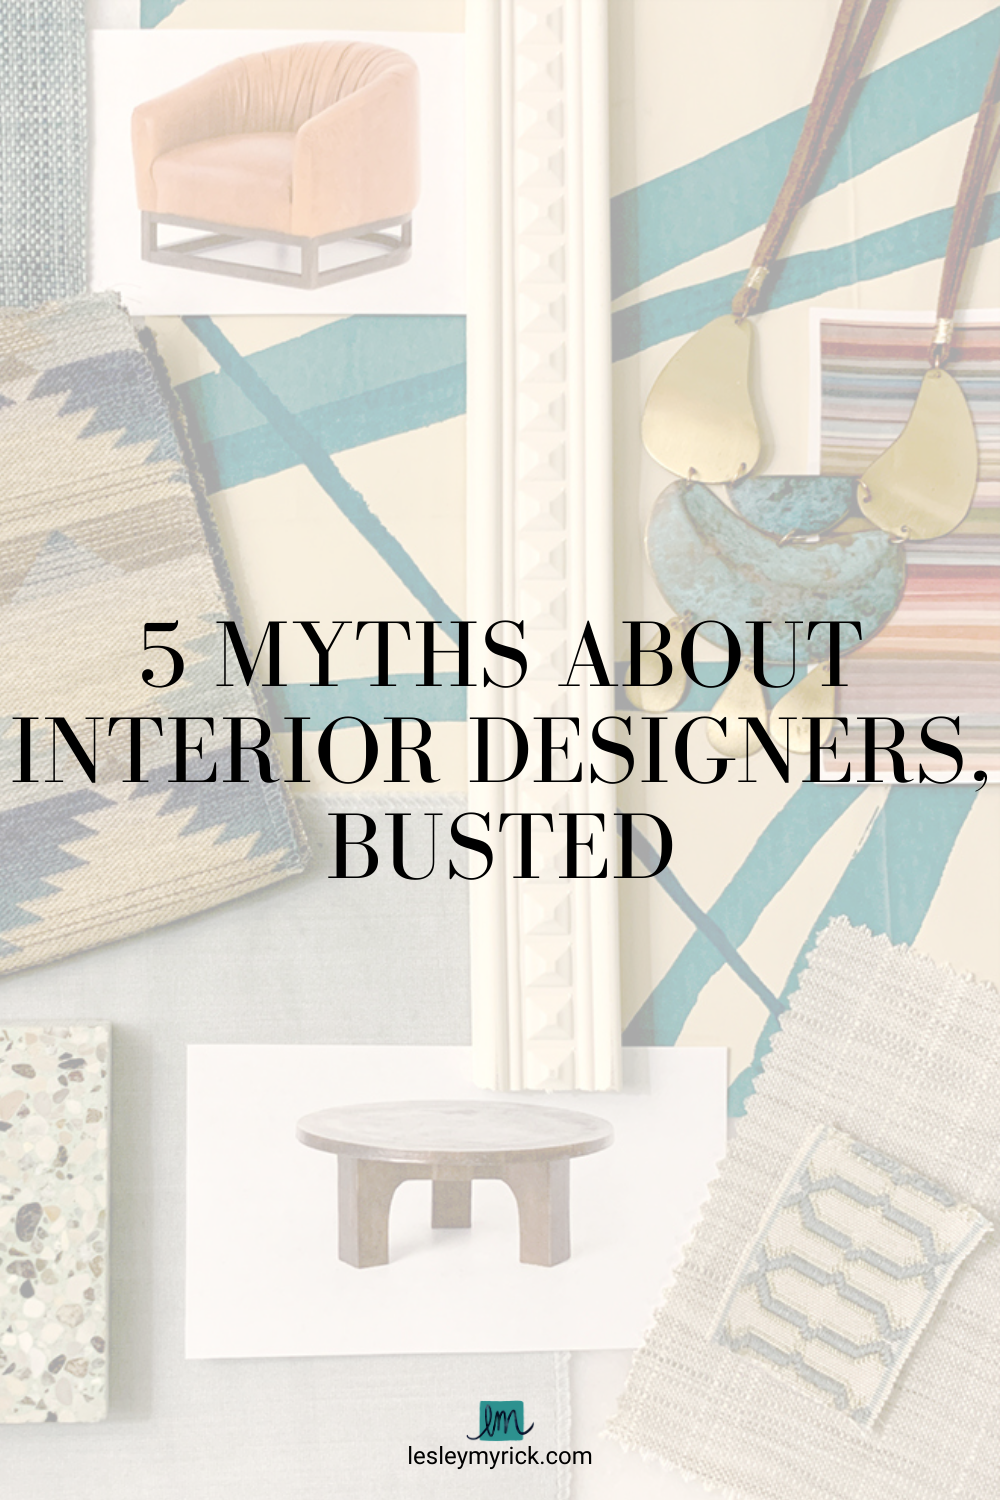 5 myths about interior designers, busted. 